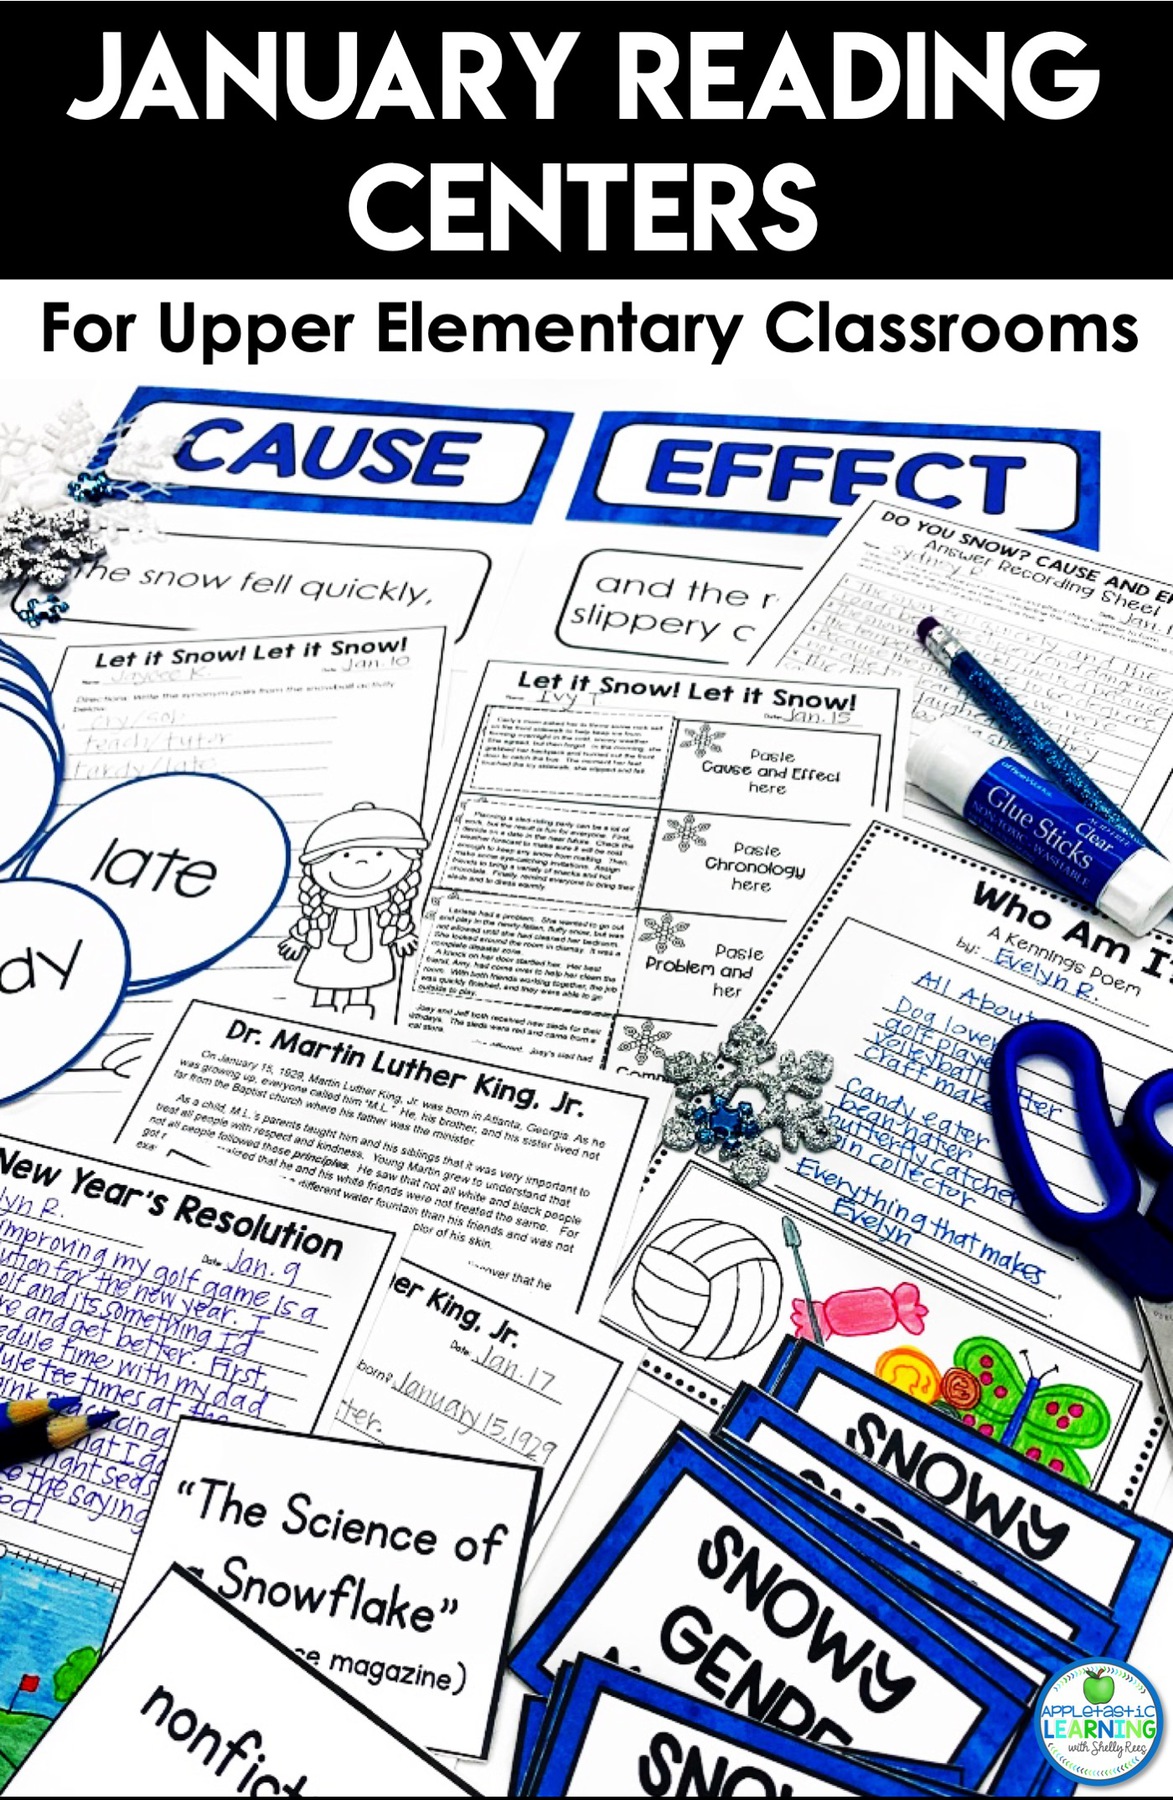 January reading and language arts activities for the upper elementary classroom